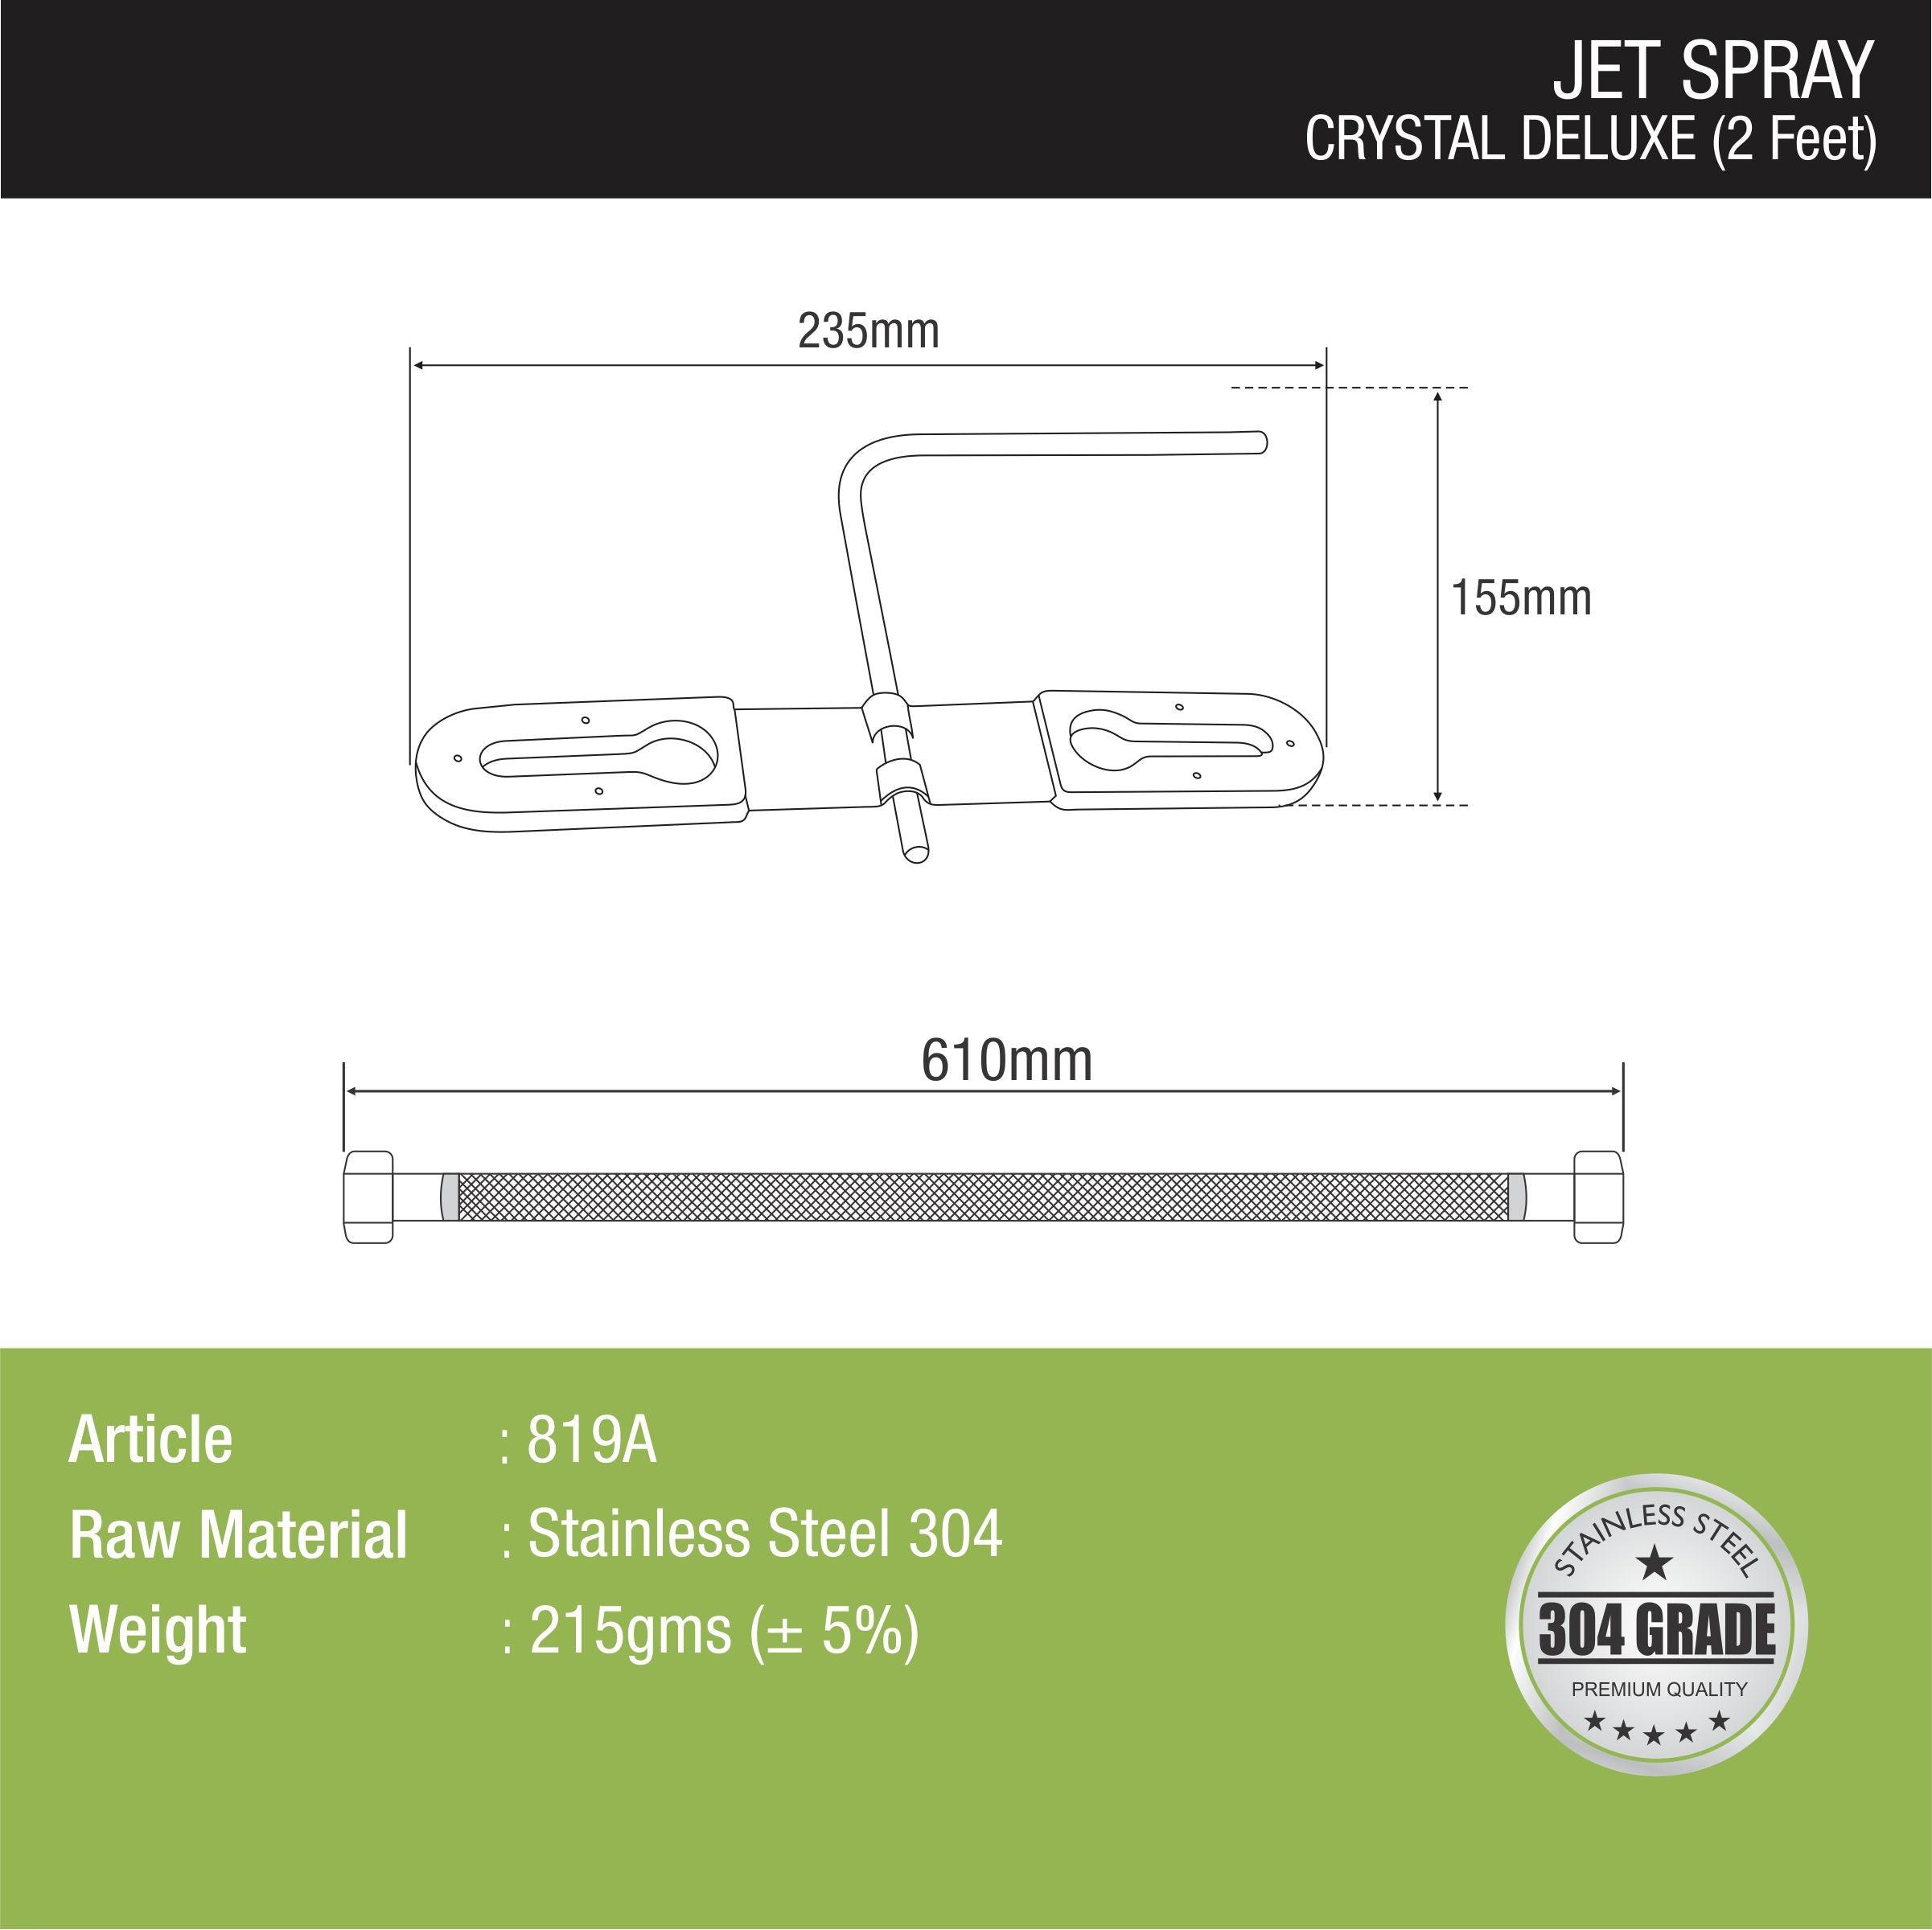 Crystal Deluxe Jet Spray with 304SS Holder & 2 Feet Hose dimensions and sizes